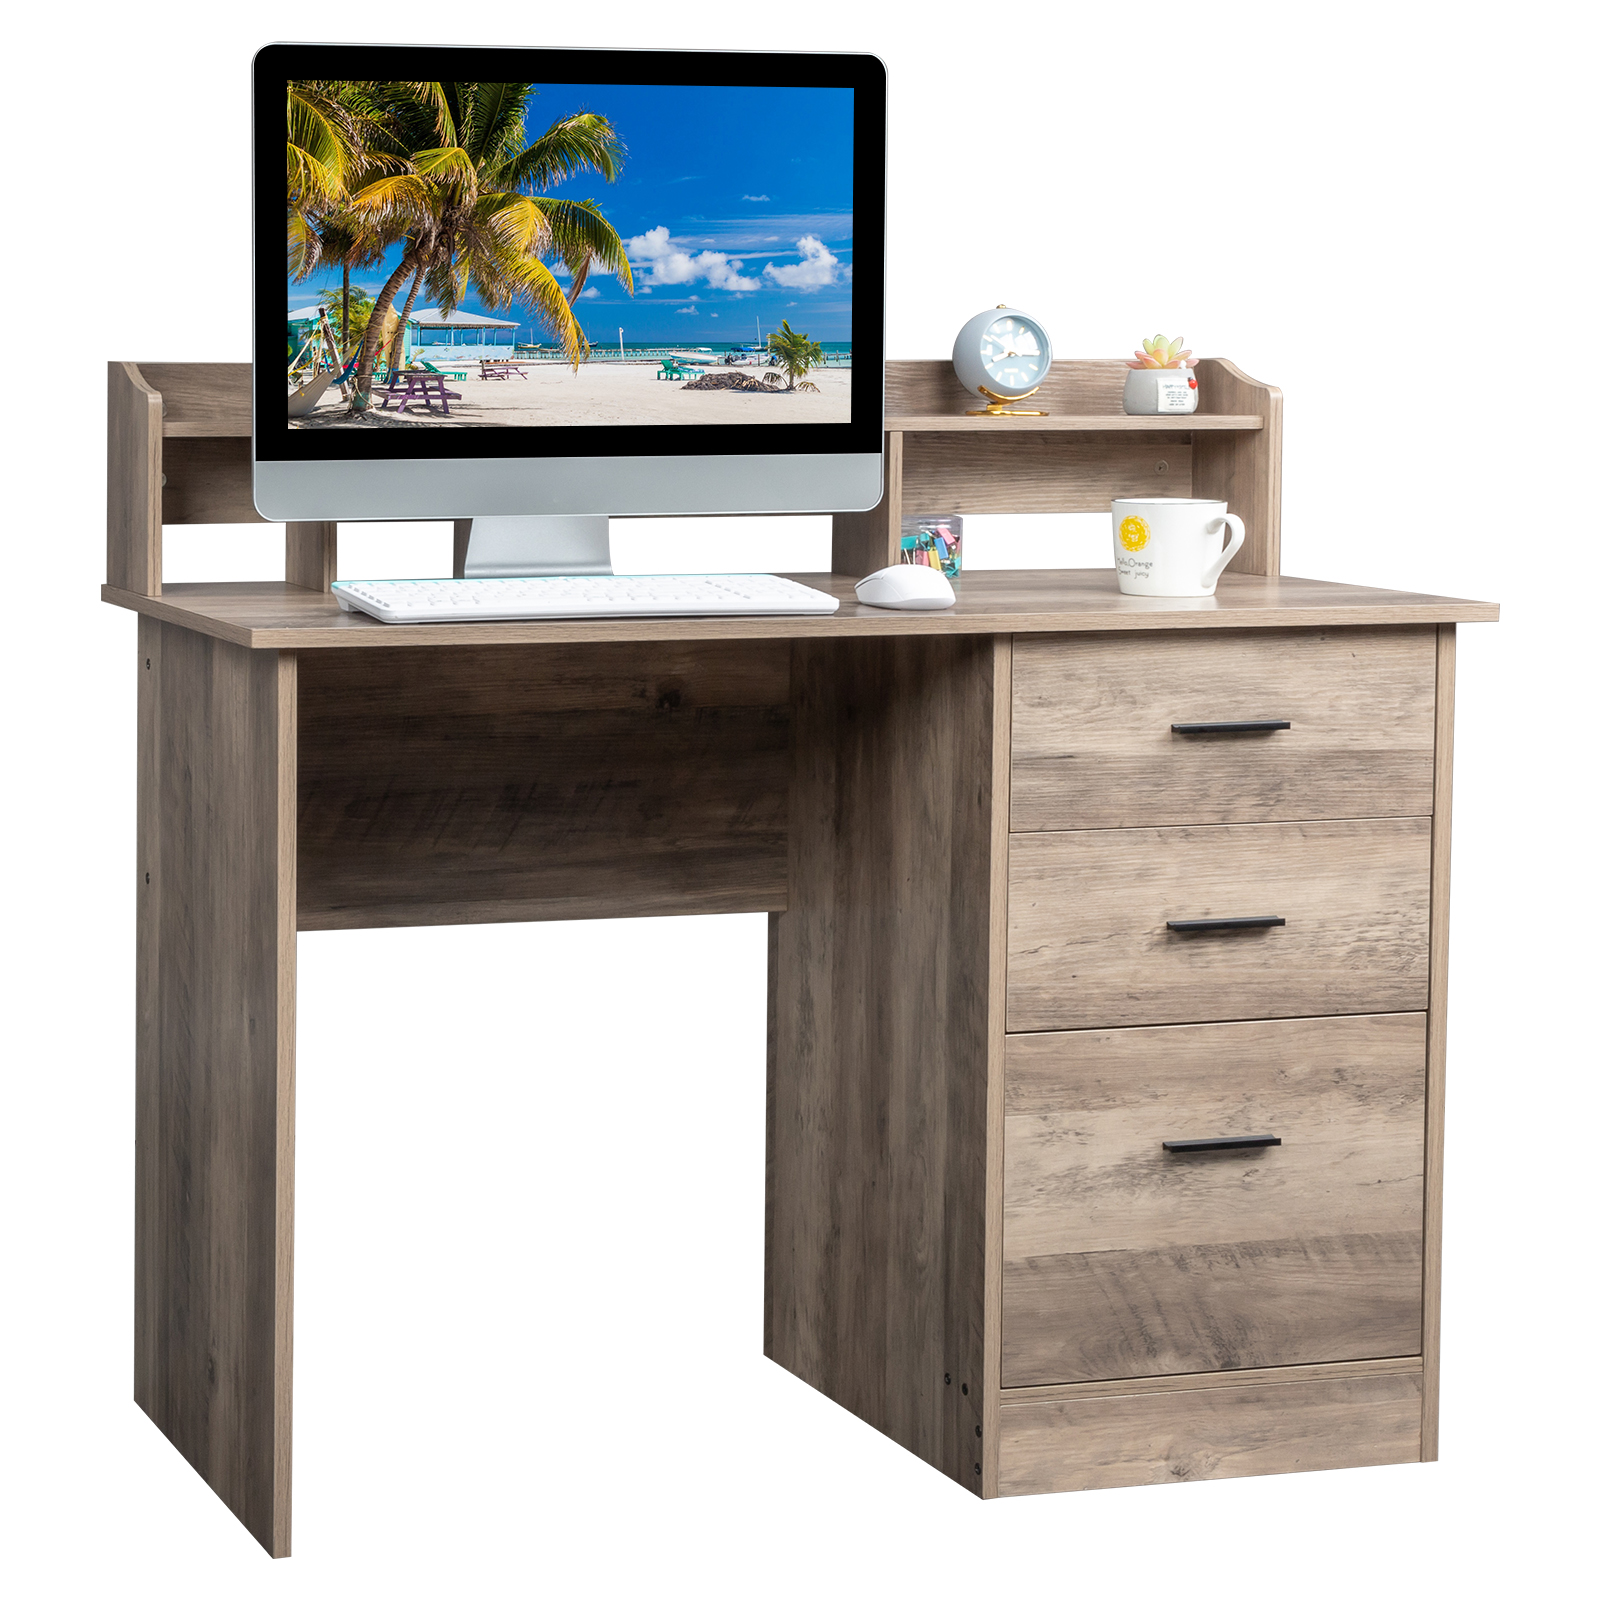 Ktaxon Wood Computer Desk Office Laptop PC Work Table, Writing Desk with 3 Drawers File Cabinet for Letter Size,Gray - image 1 of 11